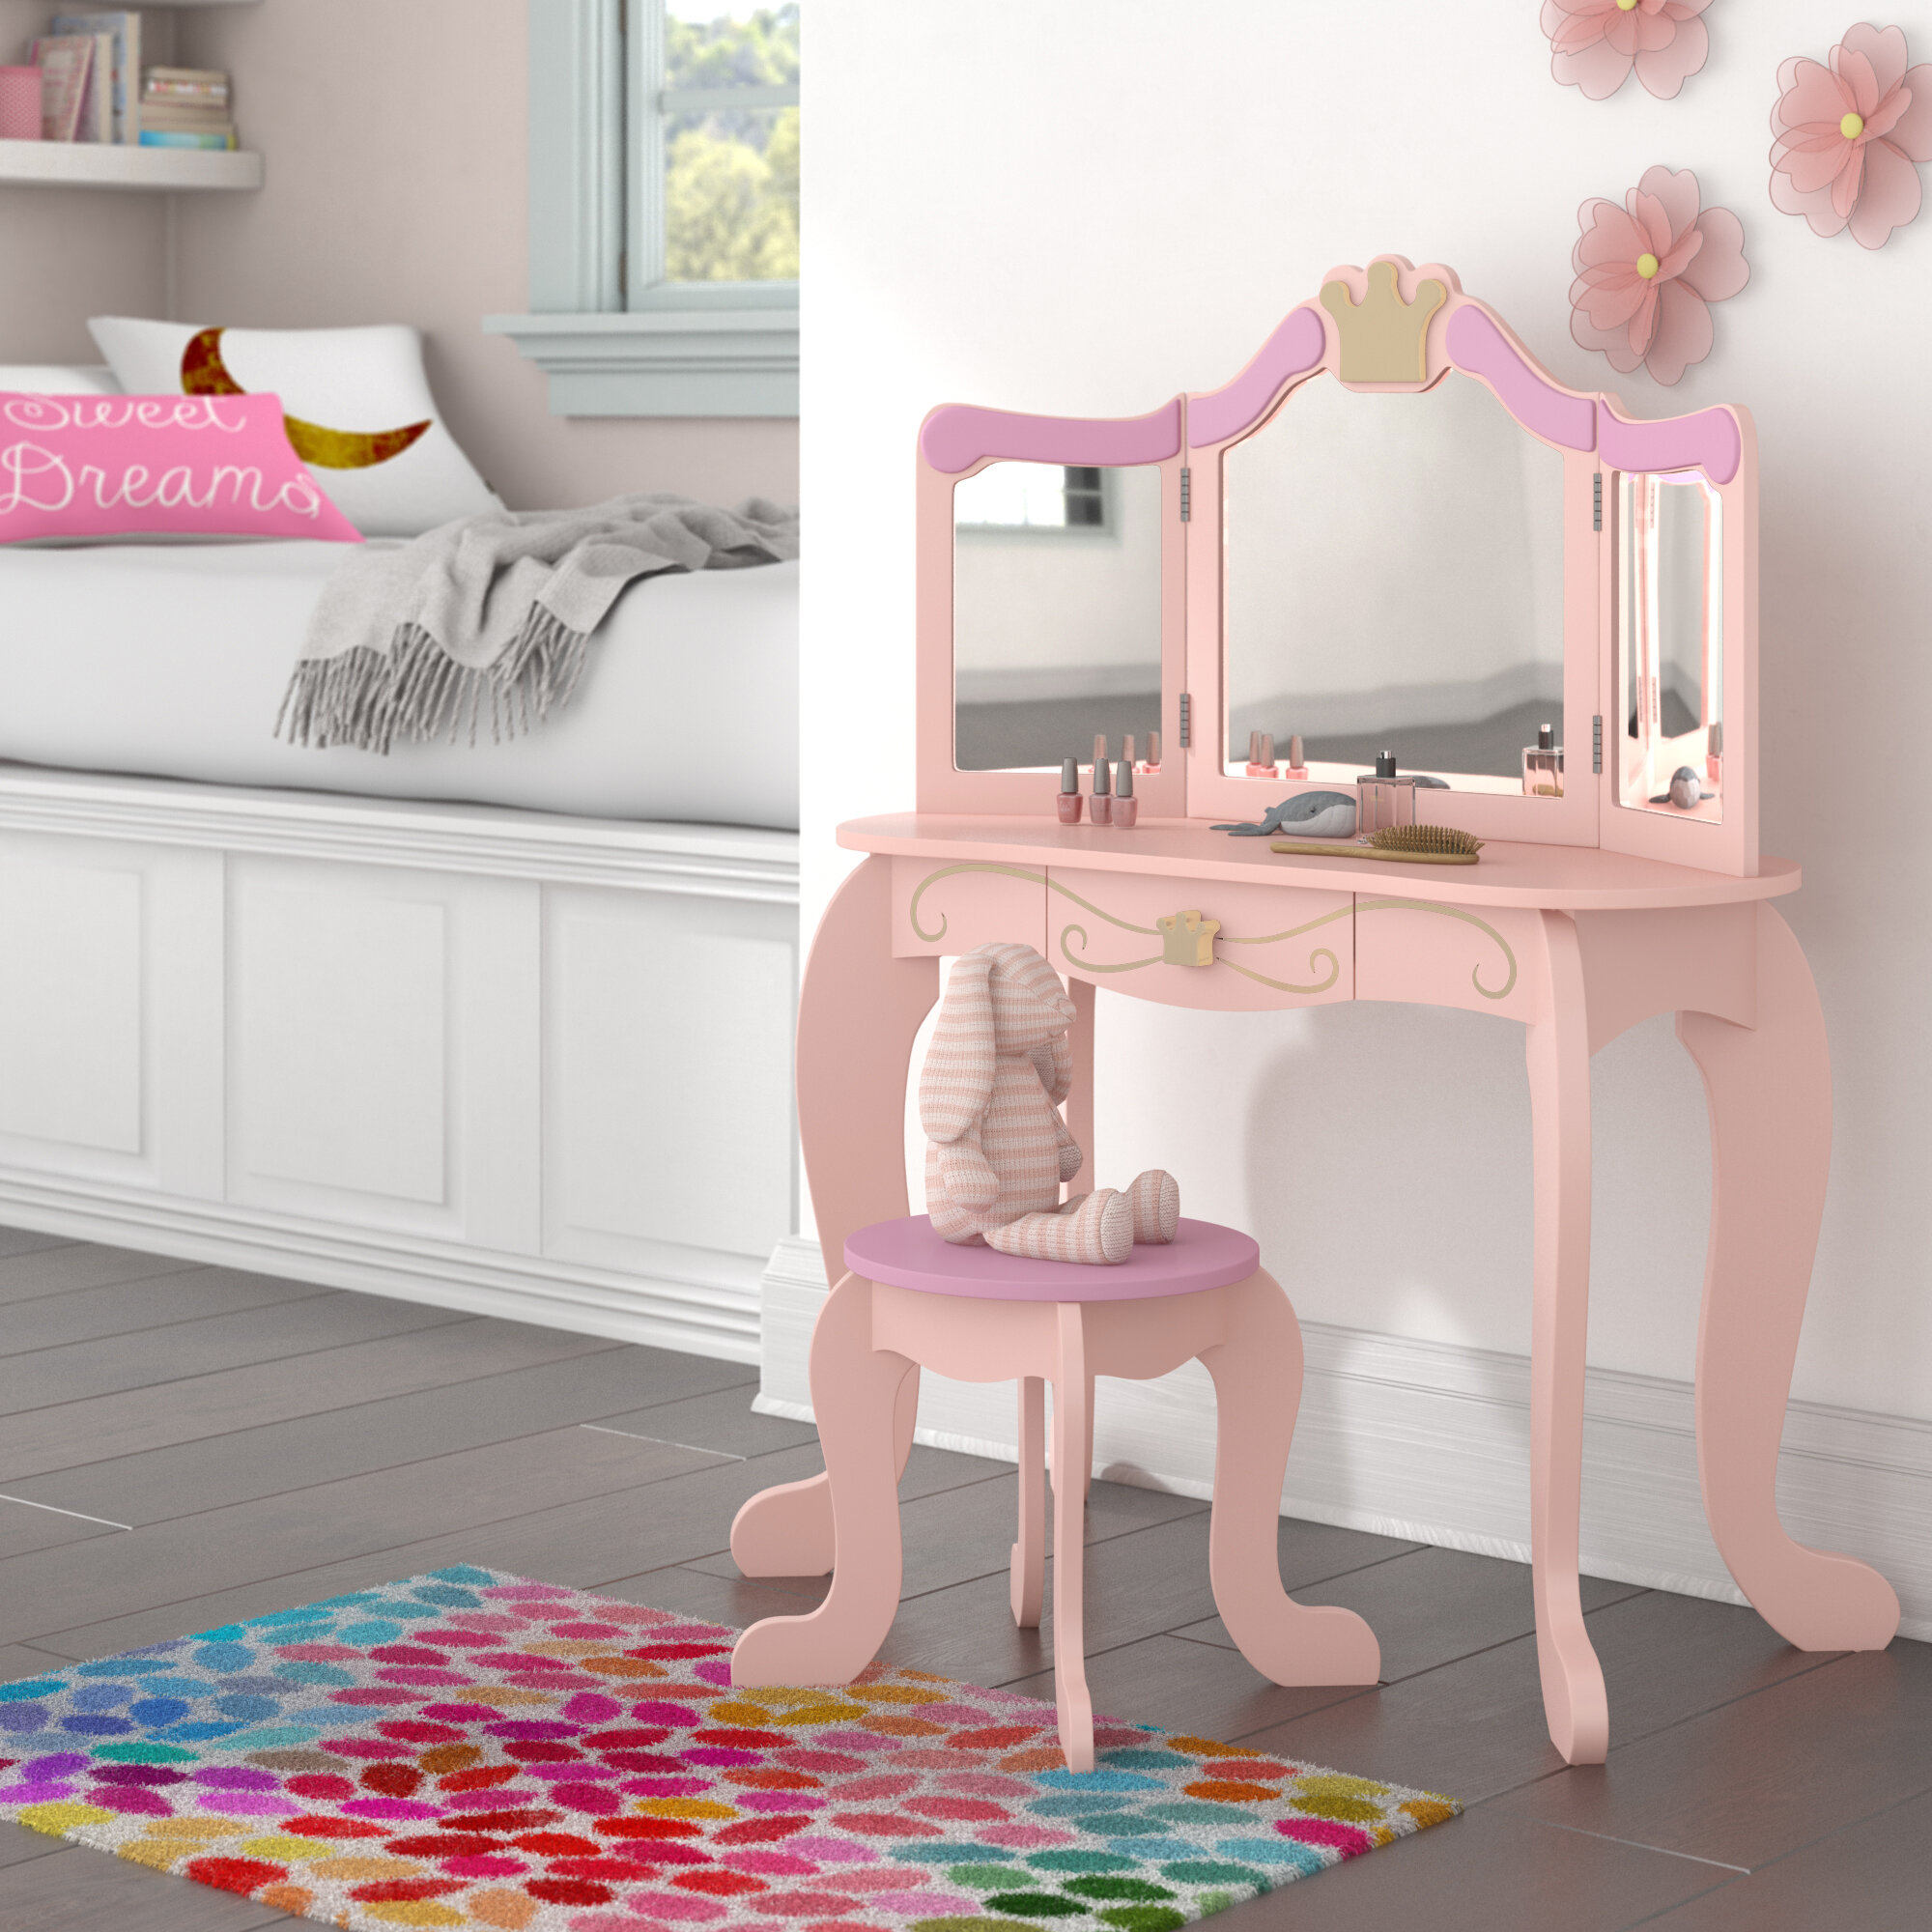 Mirror design of wood for rooms of child